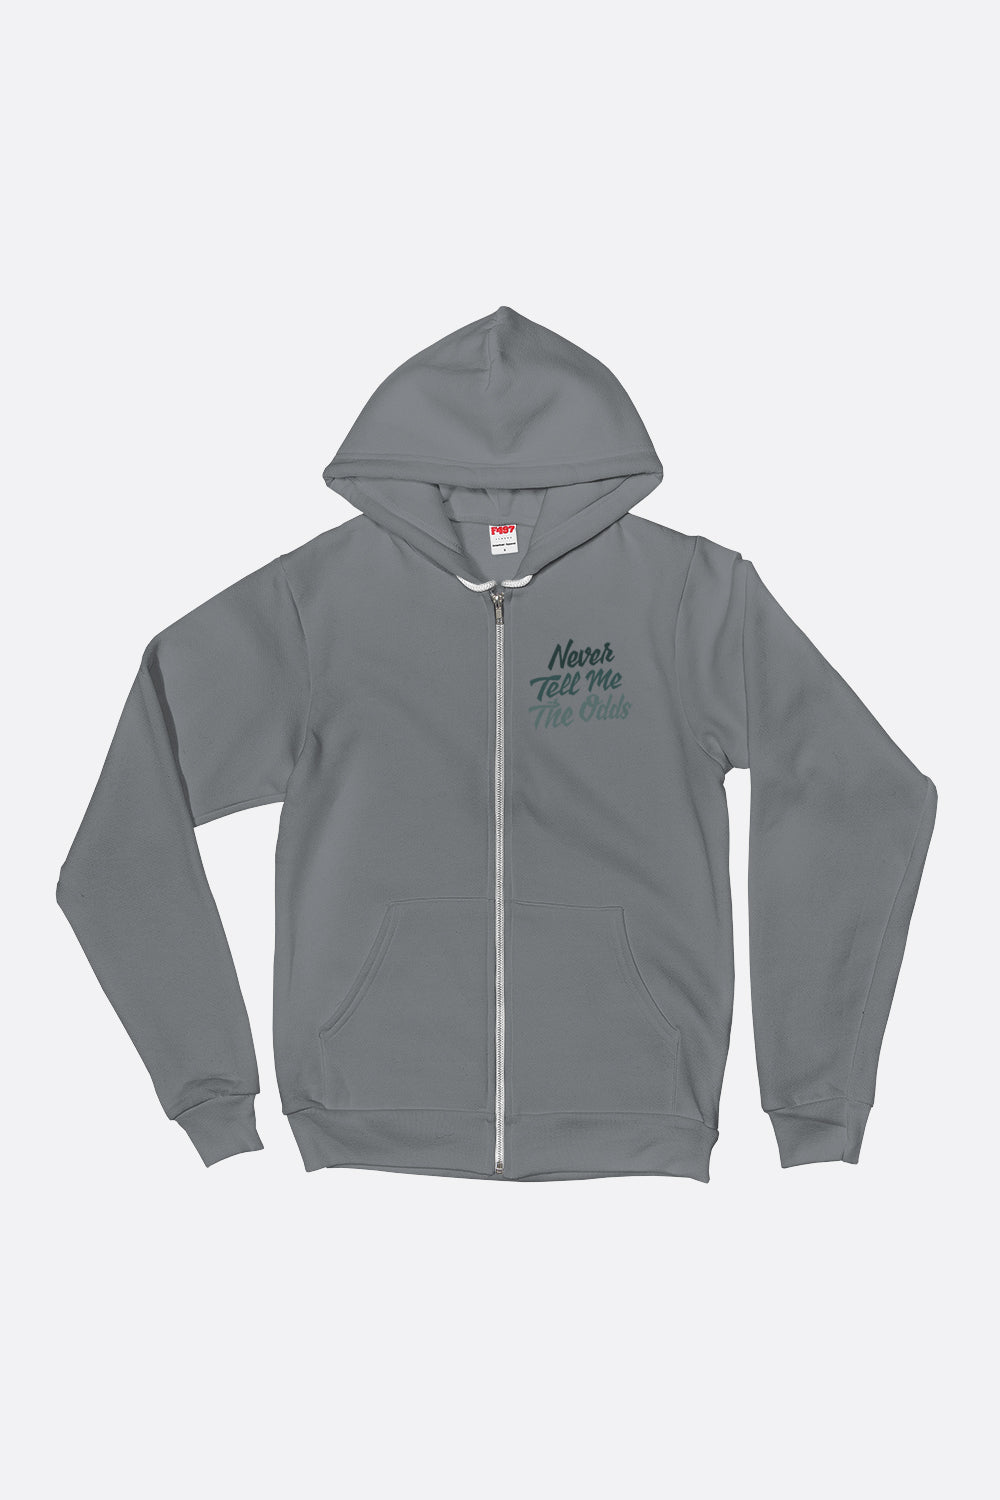 Never Tell Me the Odds Zip Up Hoodie